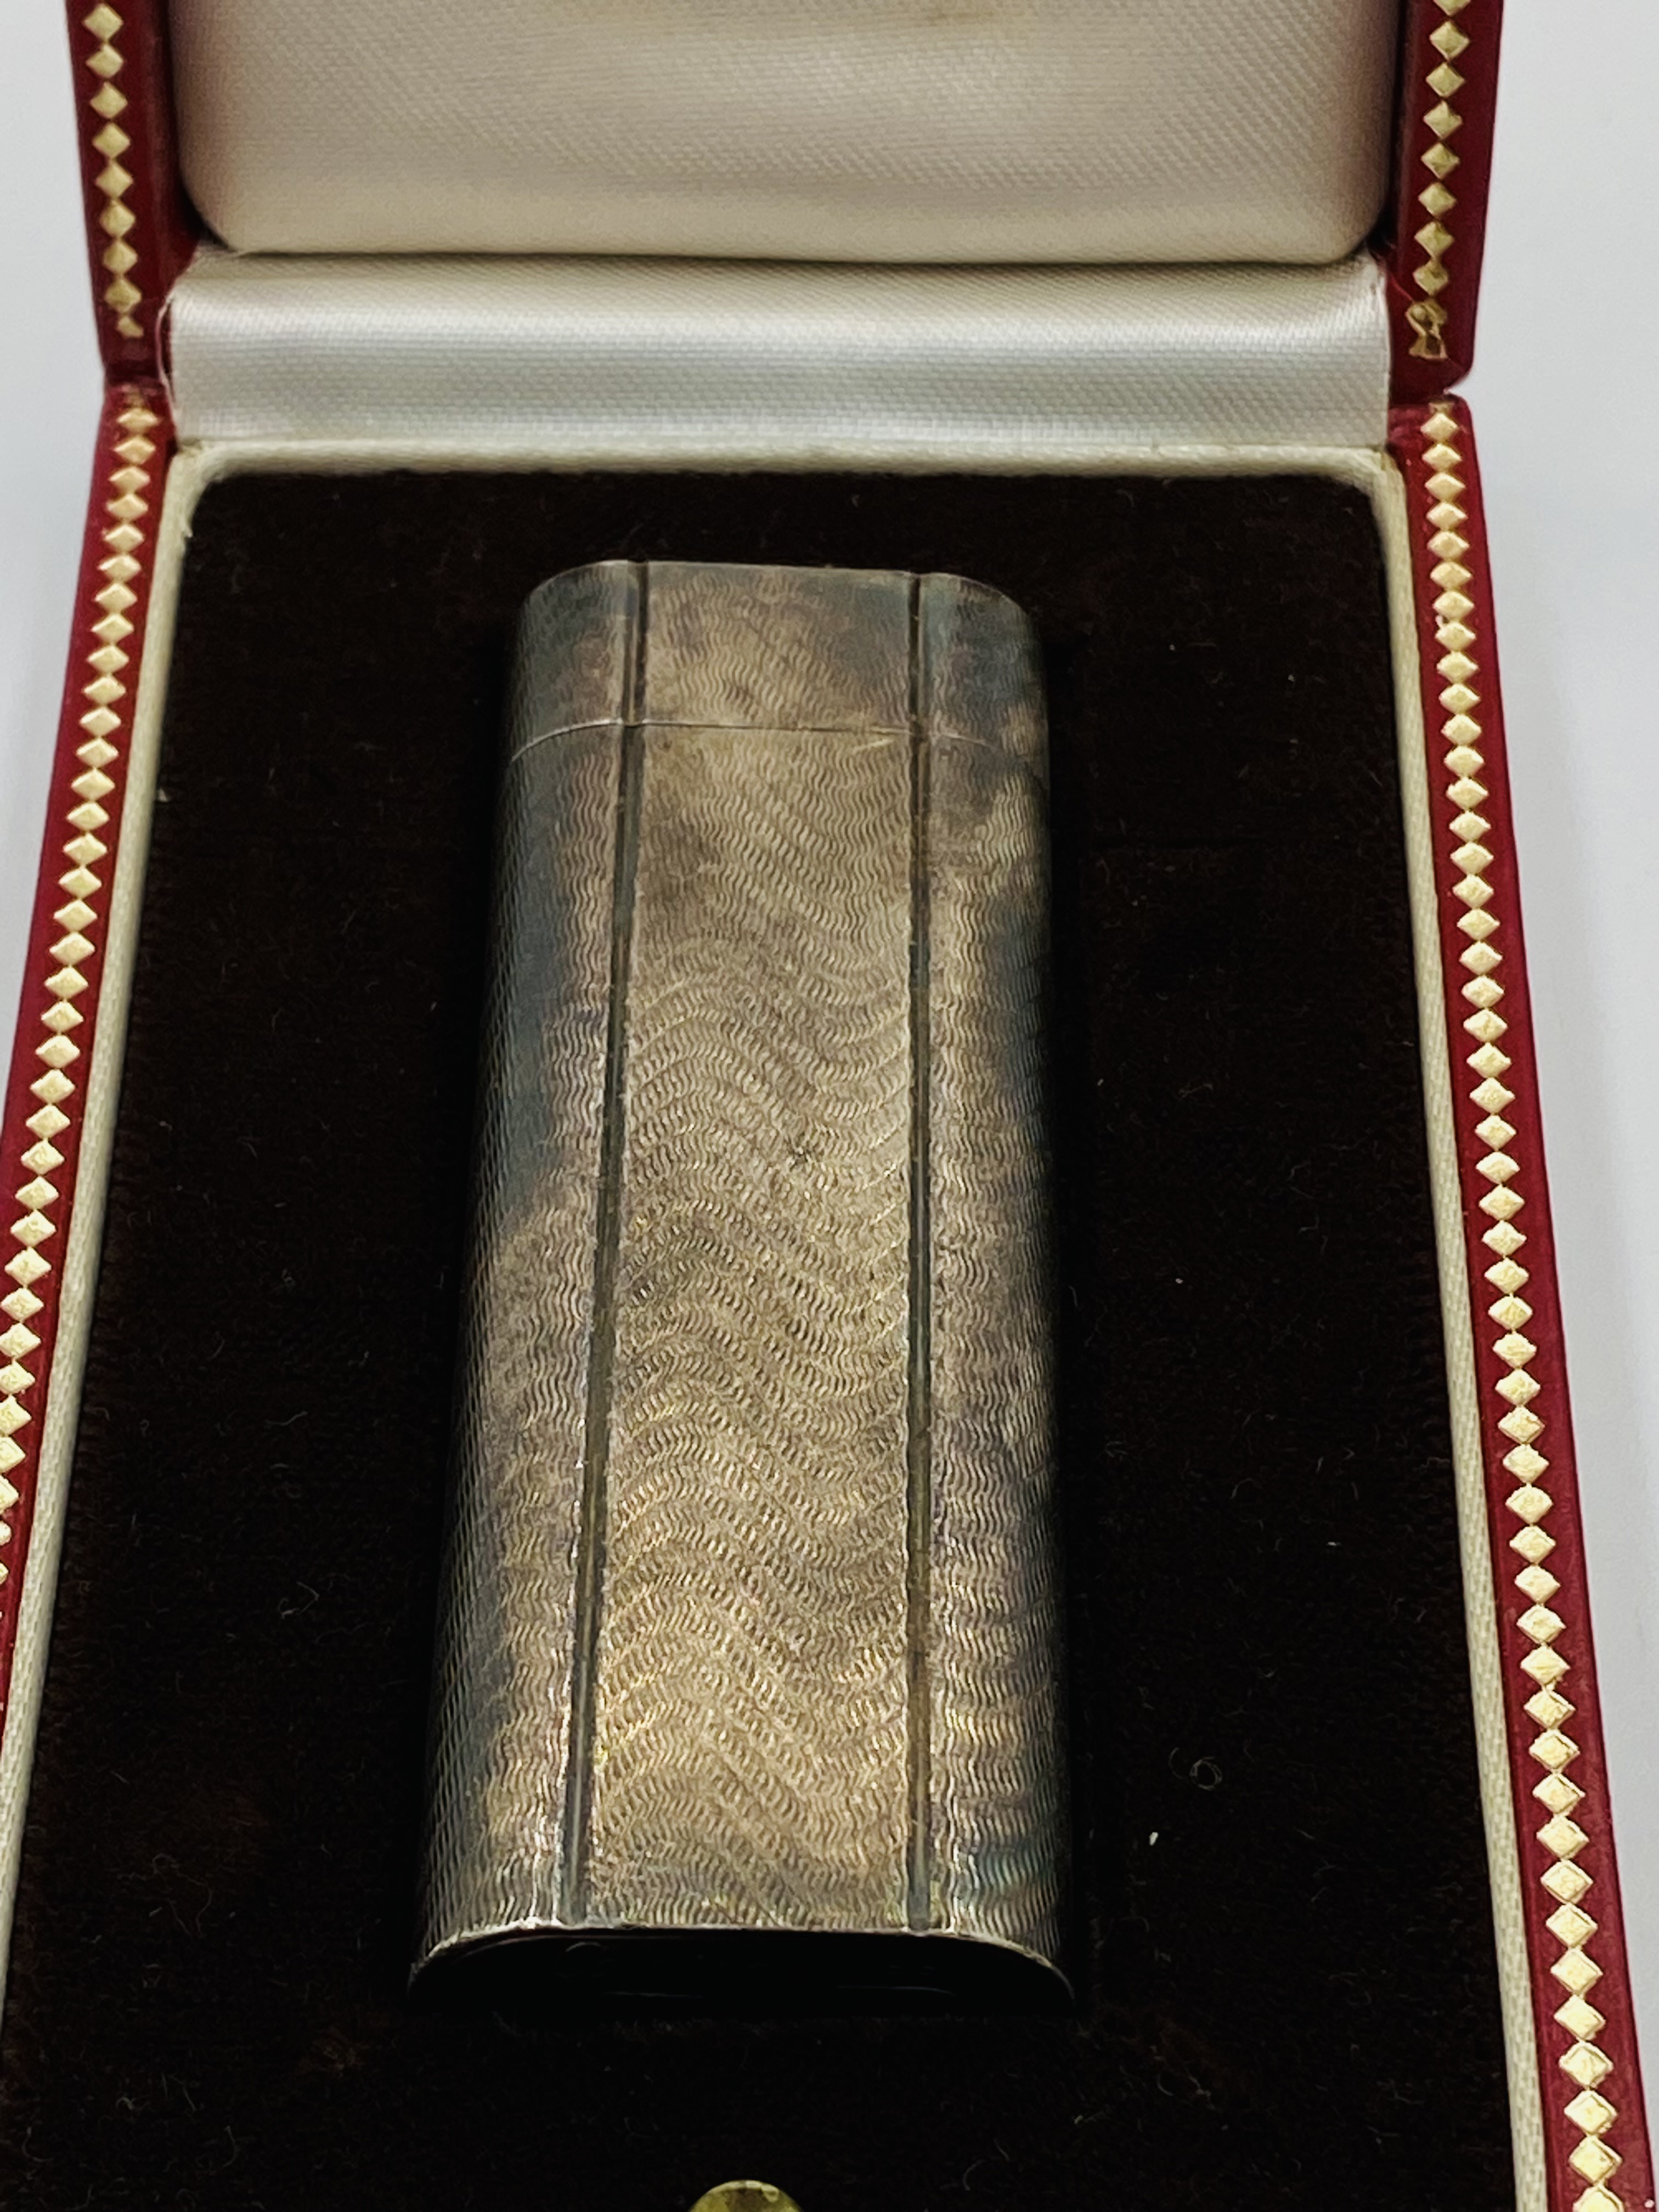 Cartier engine turned silver plated lighter - Image 3 of 5